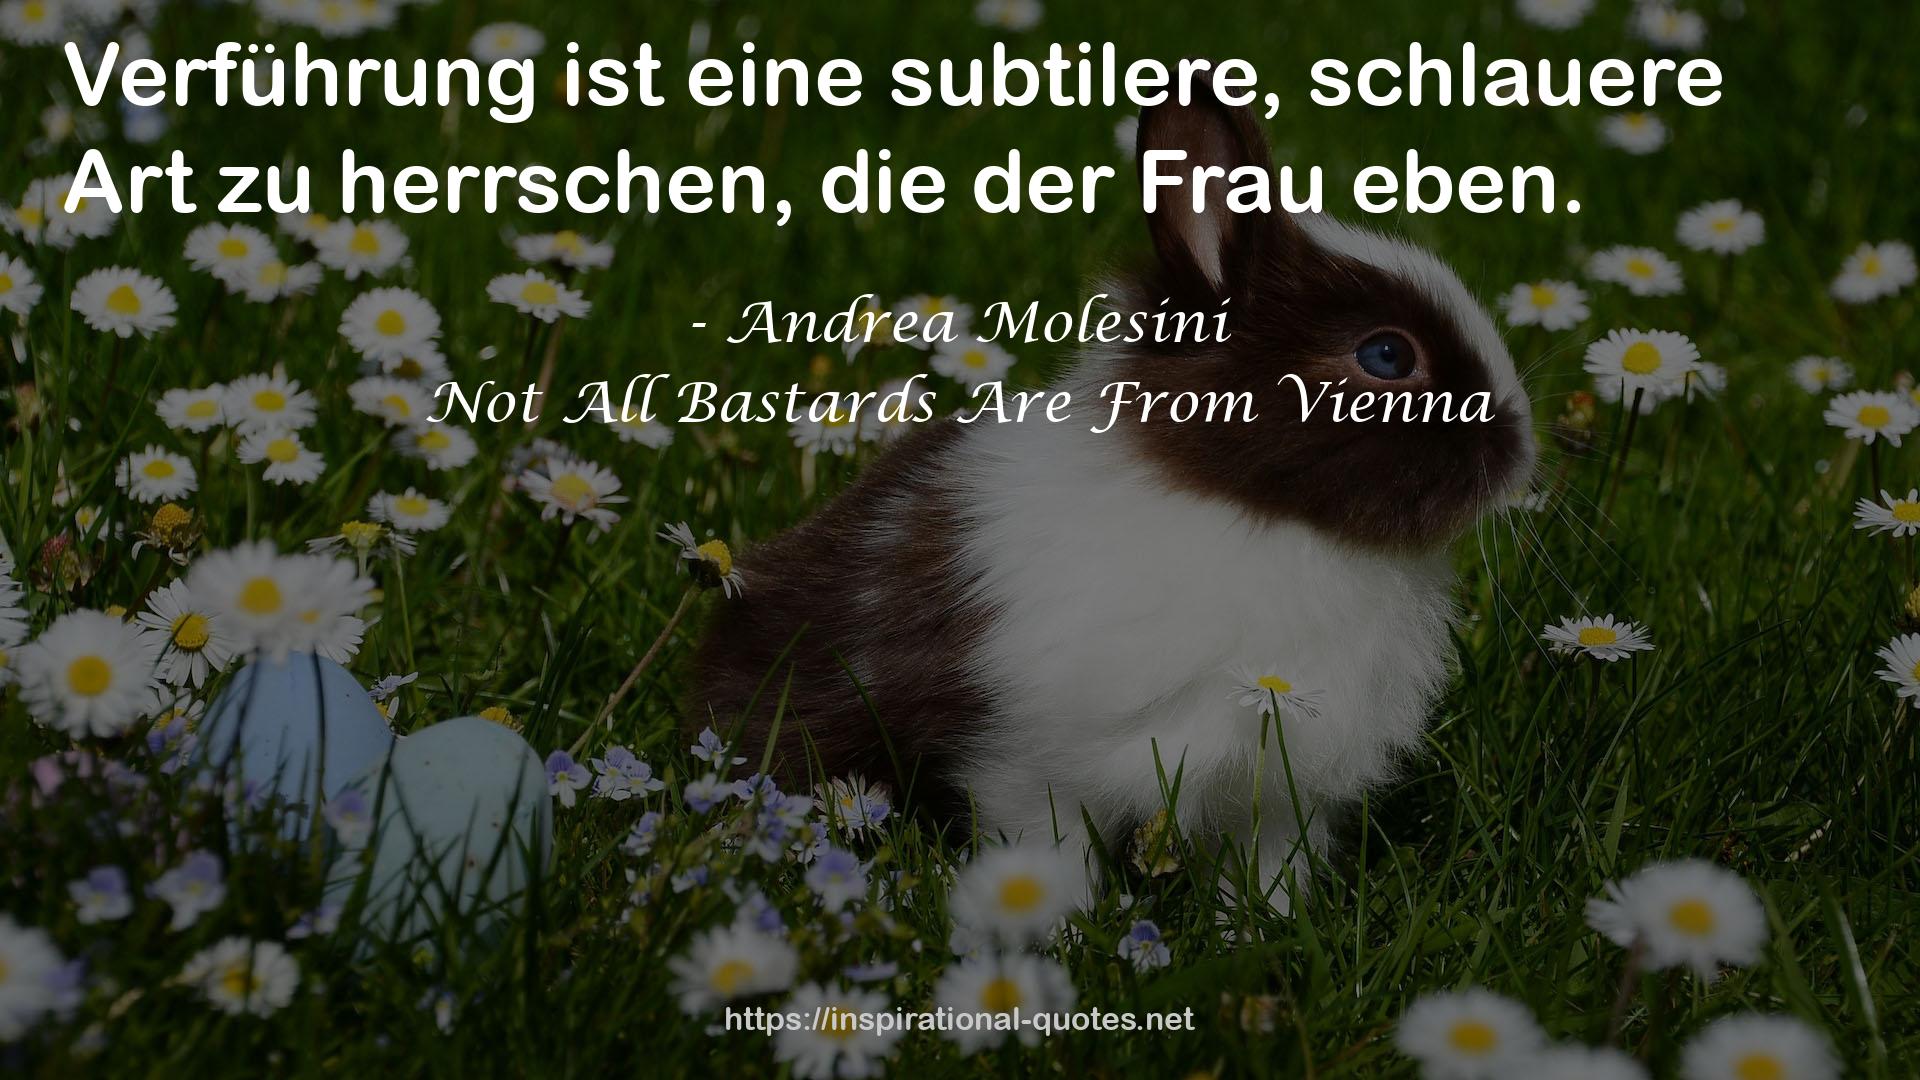 Not All Bastards Are From Vienna QUOTES